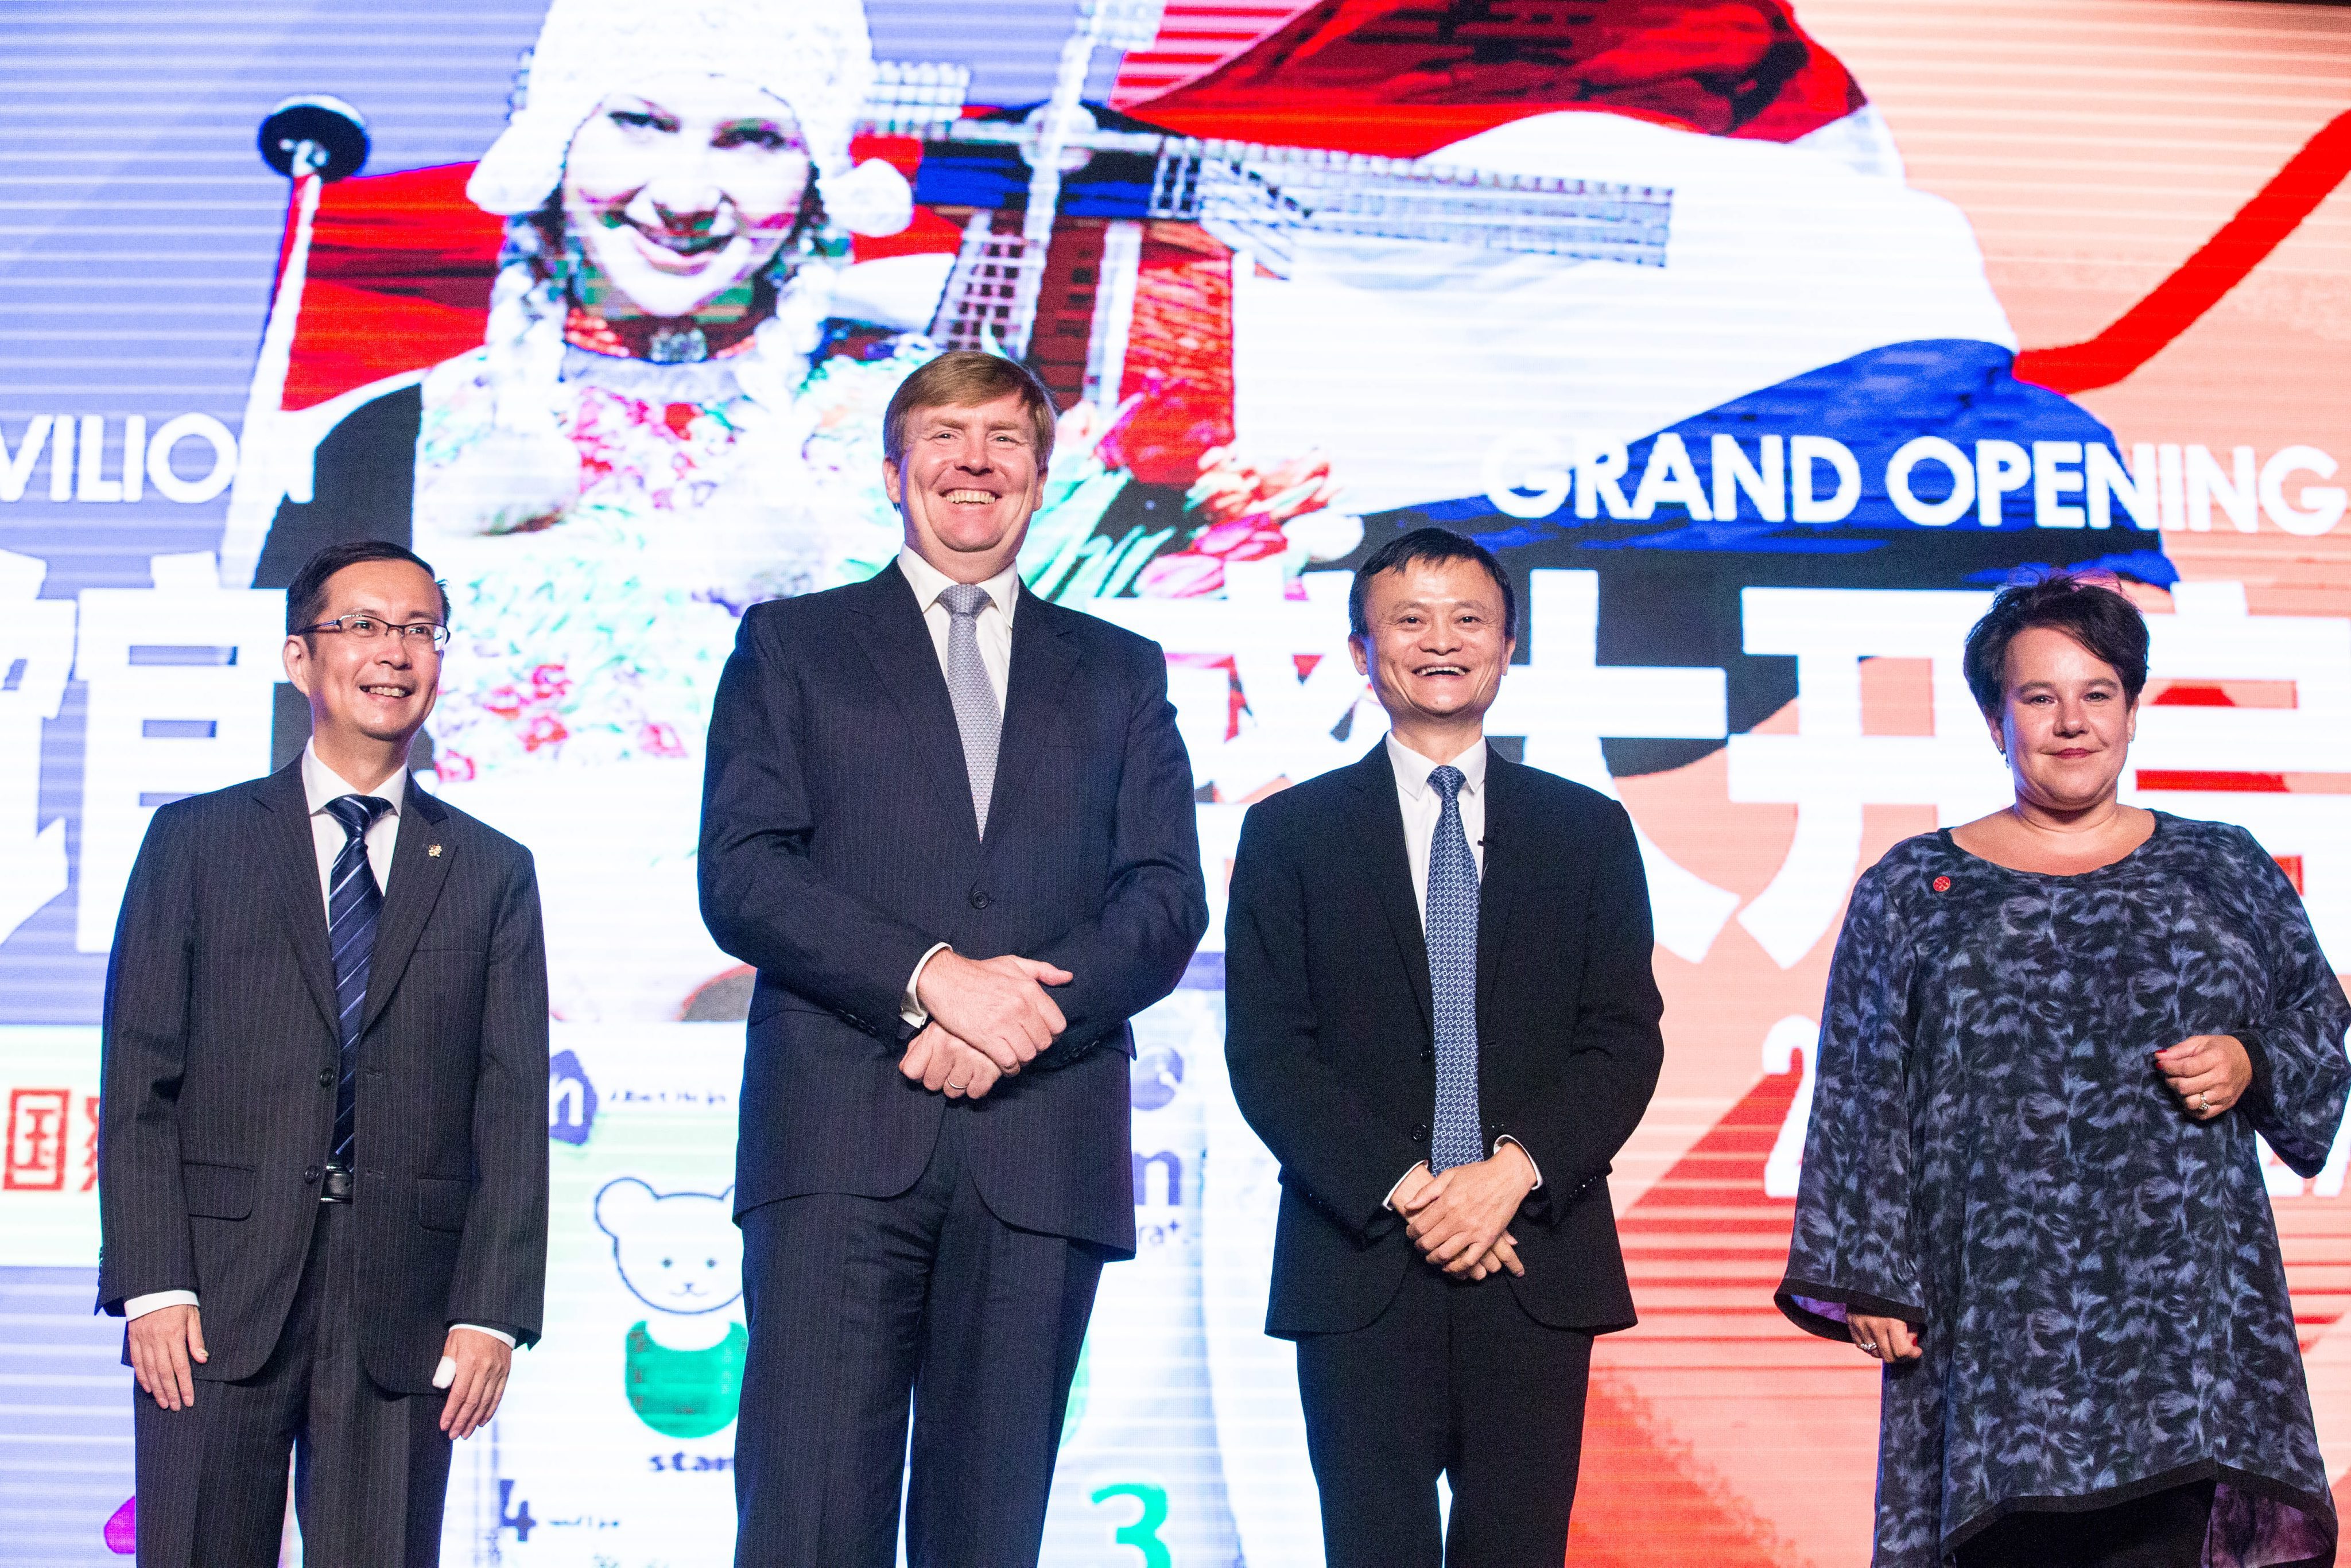 2015-10-29 11:15:21 epa05001455 From L-R, Daniel Zhang, CEO of Alibaba Group, Willem-Alexander, King of the Netherlands, Jack Ma, Chairman of Alibaba Group, and Sharon Dijksma, State Secretary of the Ministry of Economic Affairs of the Netherlands, attend a ceremony to launch an e-commerce campaign for Dutch goods on Alibaba's online platform, at the headquarters of Alibaba Group in Hangzhou in east China's Zhejiang province 29 October 2015. EPA/XU KANGPING CHINA OUT